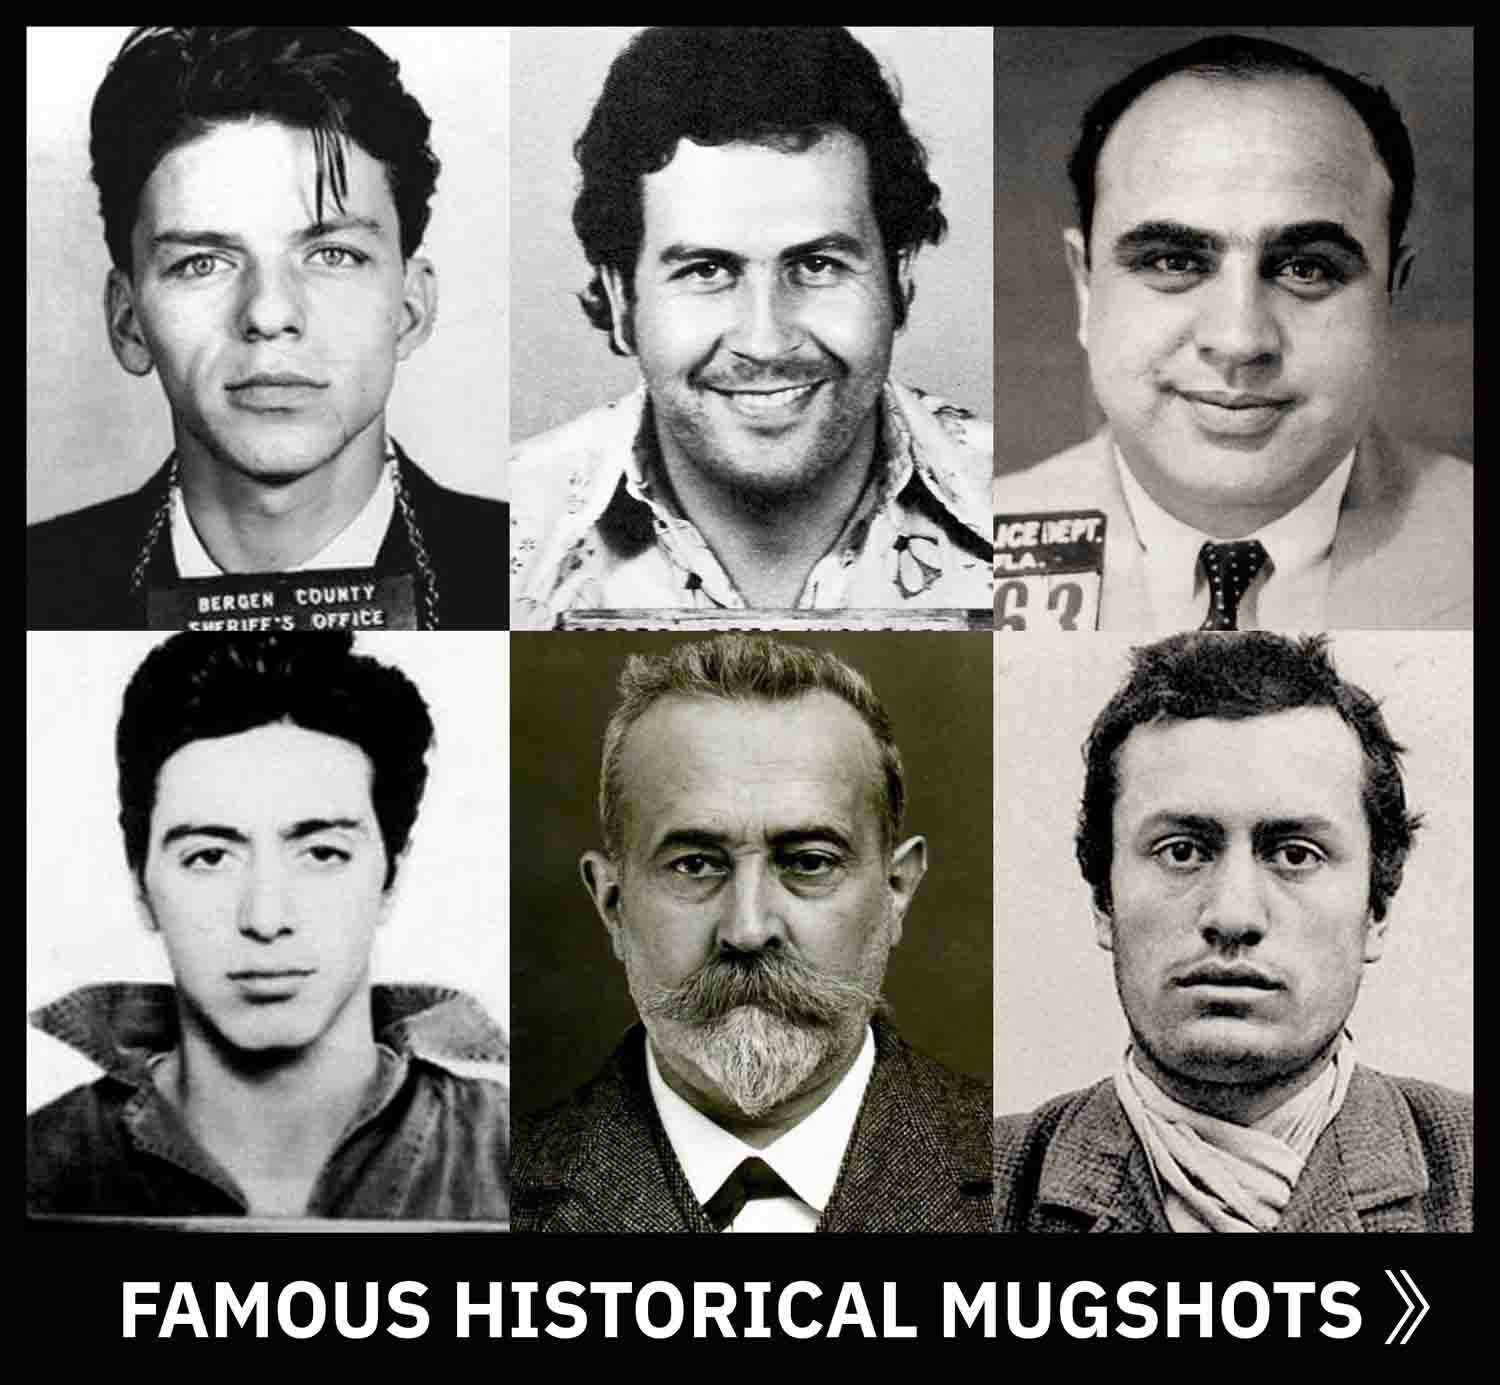 Click here to view rarely seen historical mugshots, famous drug lords and mafia mugshots and learn about the history of mugshot photography.